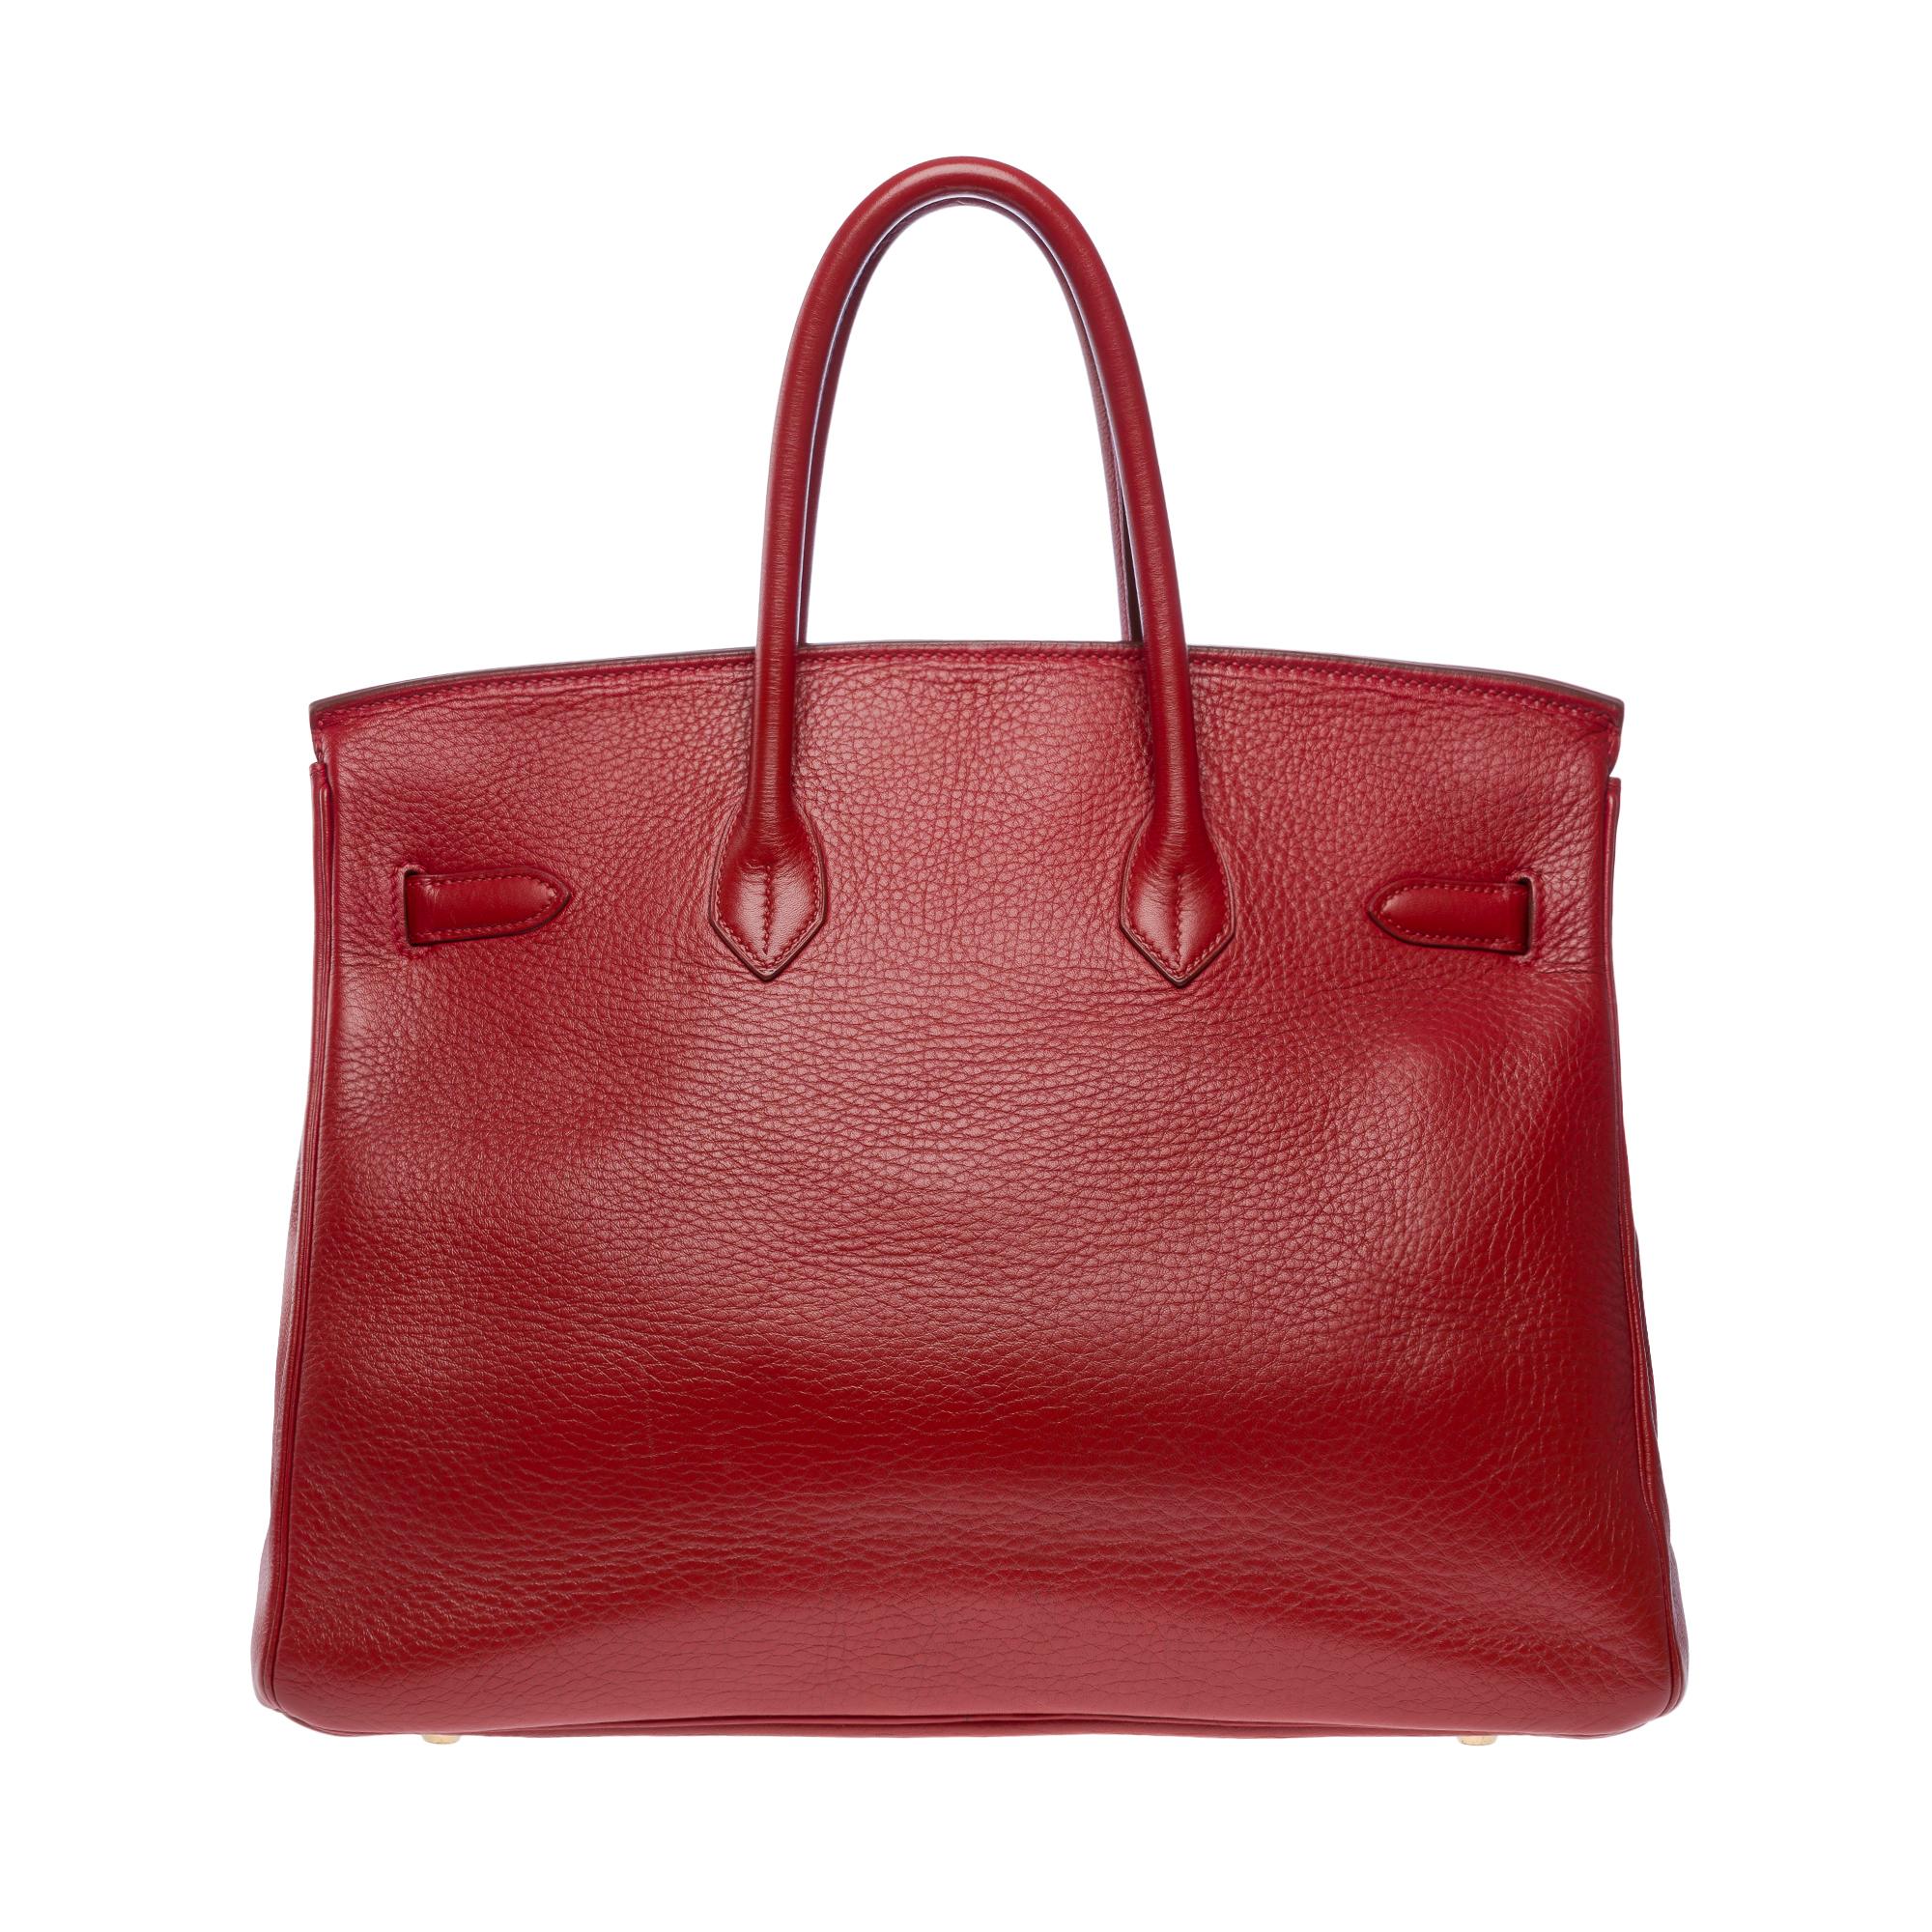 Stunning Hermes Birkin 35 in Rouge Garance Togo leather , gold plated metal hardware, double handle in red leather for hand carry

Flap closure
Interior lining in red leather, one zipped pocket, one patch pocket
Signature: 